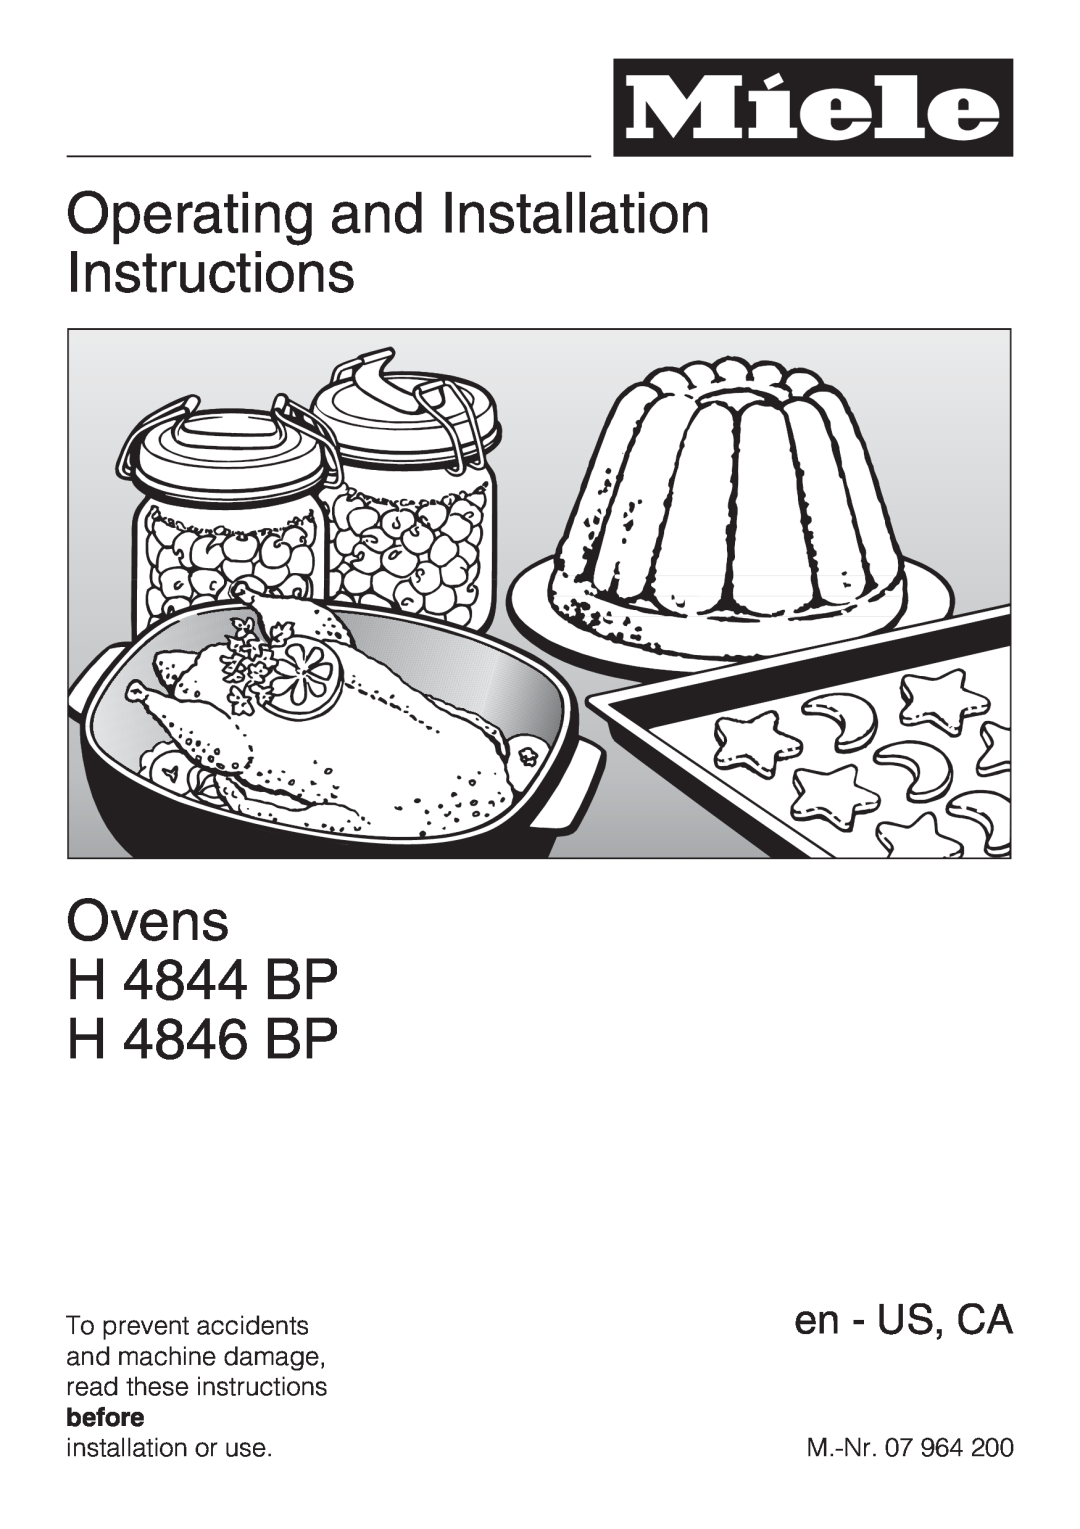 Miele installation instructions Operating and Installation Instructions Ovens H 4844 BP H 4846 BP, en - US, CA 